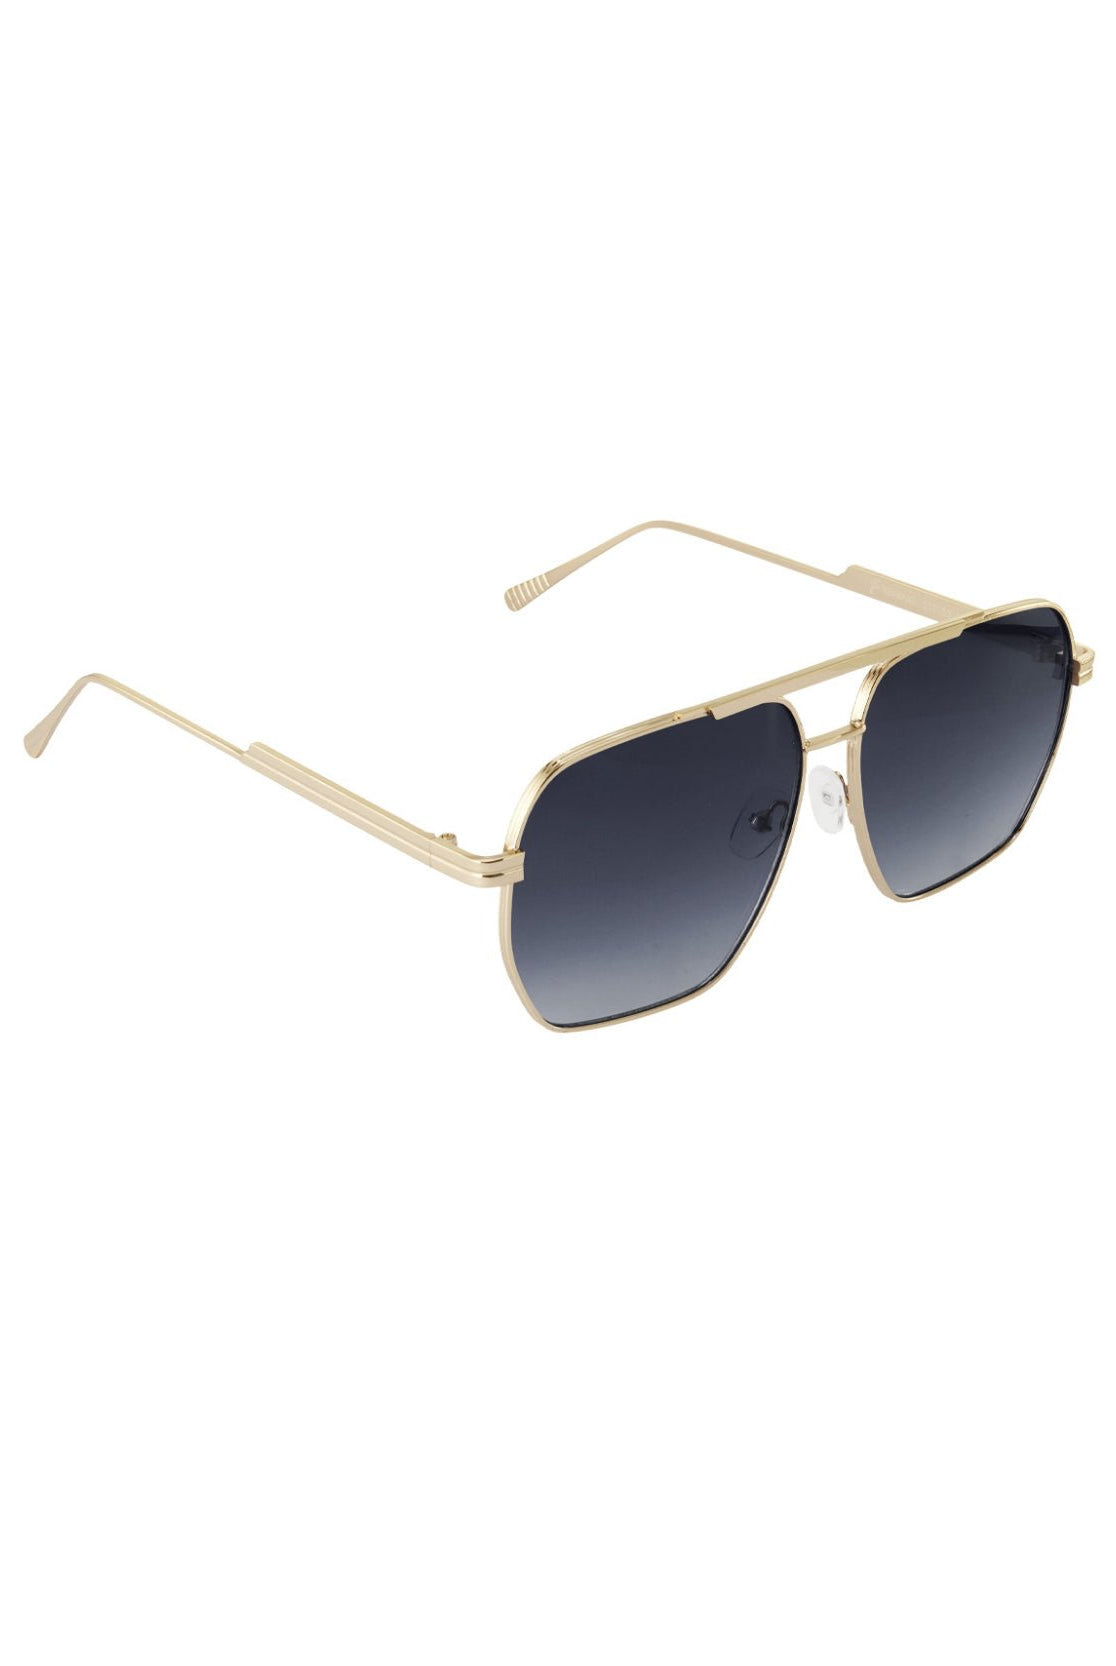 ♥︎METAL SUMMER SUNGLASSES - BLACK AND GOLD - My Favourites